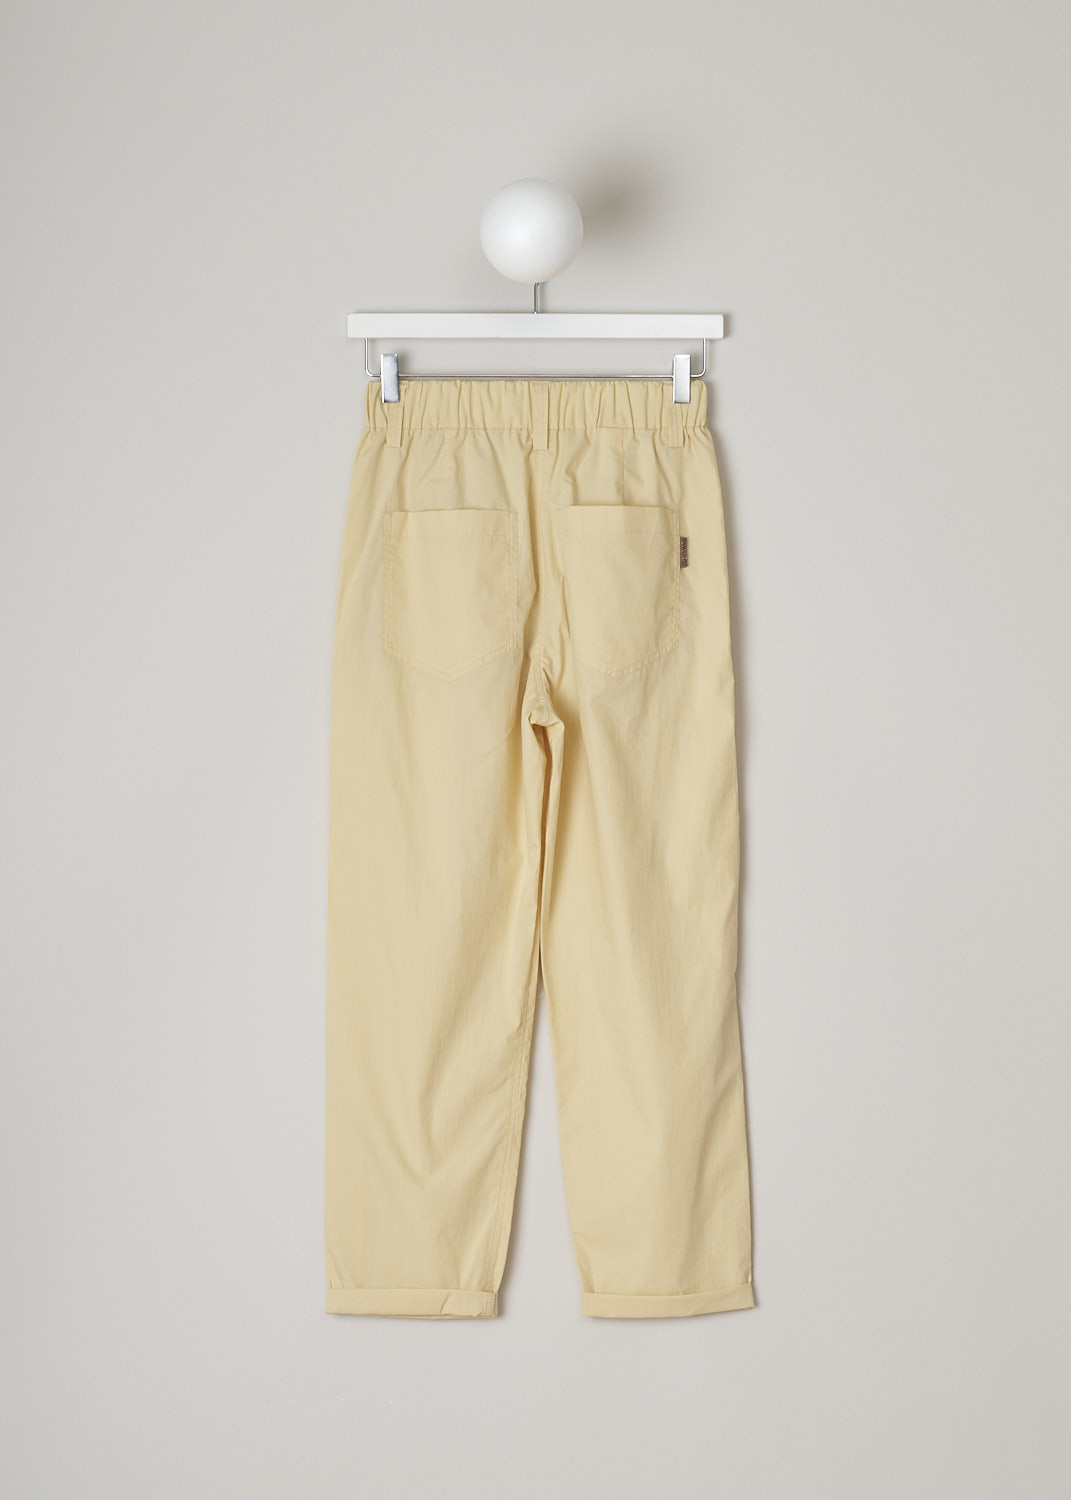 BRUNELLO CUCINELLI, PALE YELLOW SLIP-ON PANTS, M0H93P7894_C8612, Yellow, Back, These pale yellow high-waisted slip-on pants have an elasticated waistband with belt loops and a mock-fly stitched on the front. These pants have a traditional five pocket configuration, with two pockets and a single coin pocket in the front and two patch pockets in the back. The straight cropped pant legs have front pleats.  
